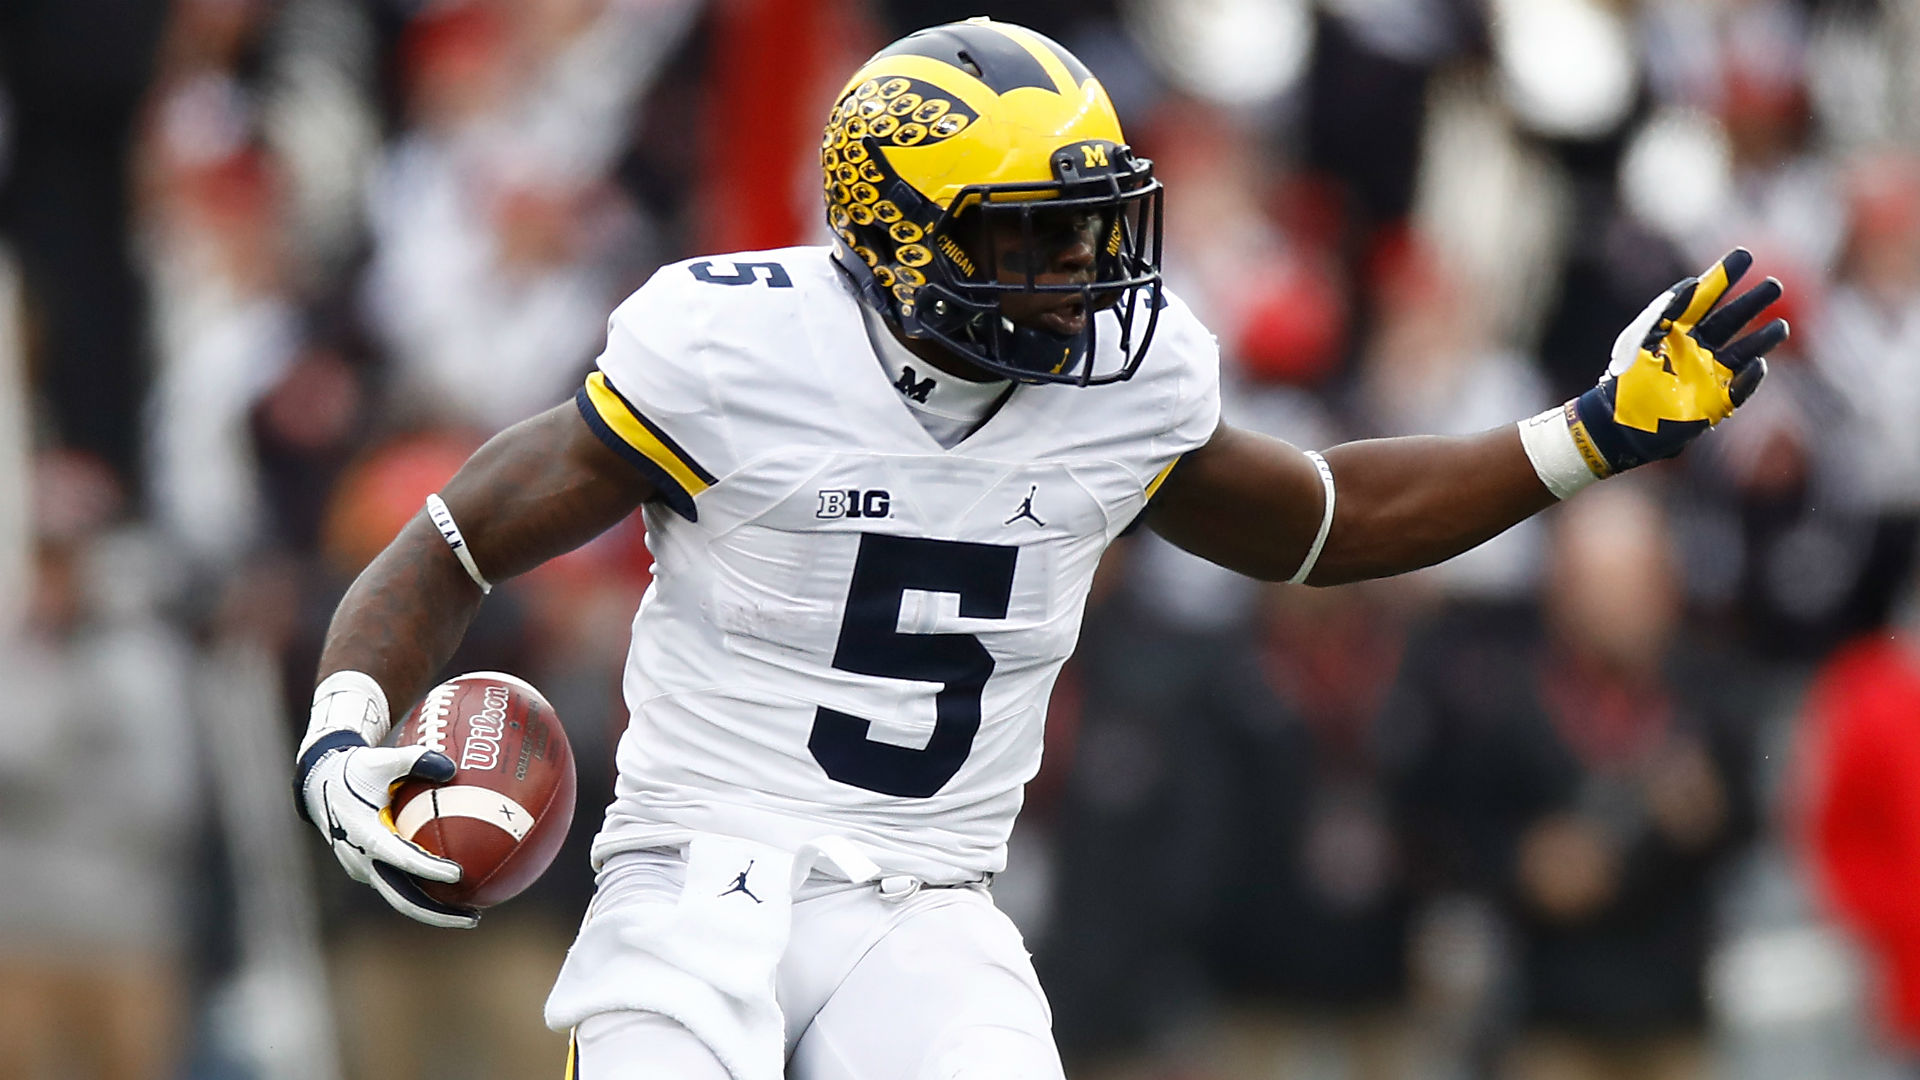 jabrill peppers related to julius peppers